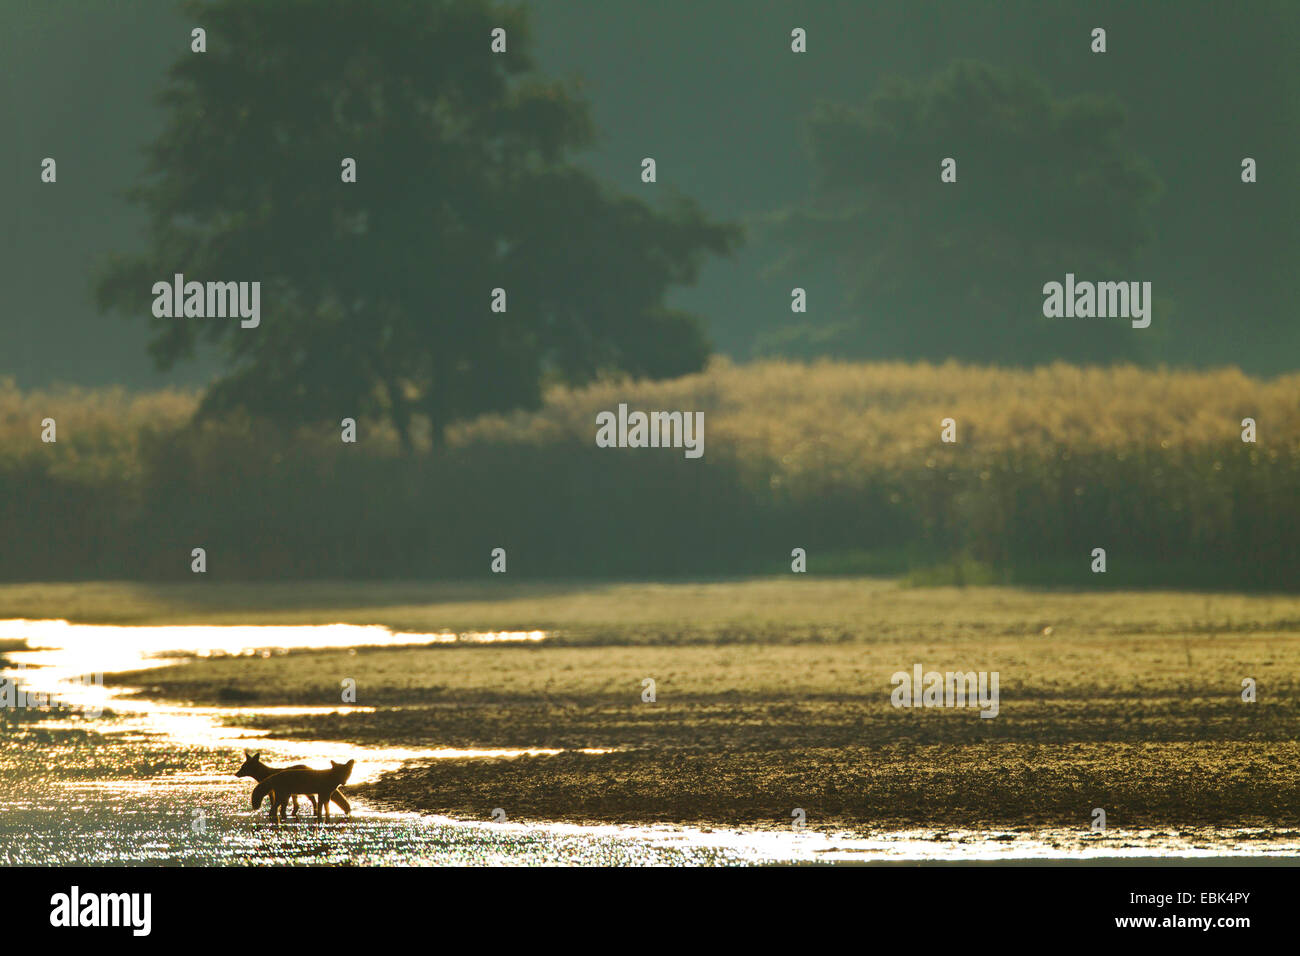 red fox (Vulpes vulpes), Red Foxes in morning light at the shore of a lake, Germany, Saxony, Oberlausitz, Upper Lausitz Heath and Pond Landscape Stock Photo